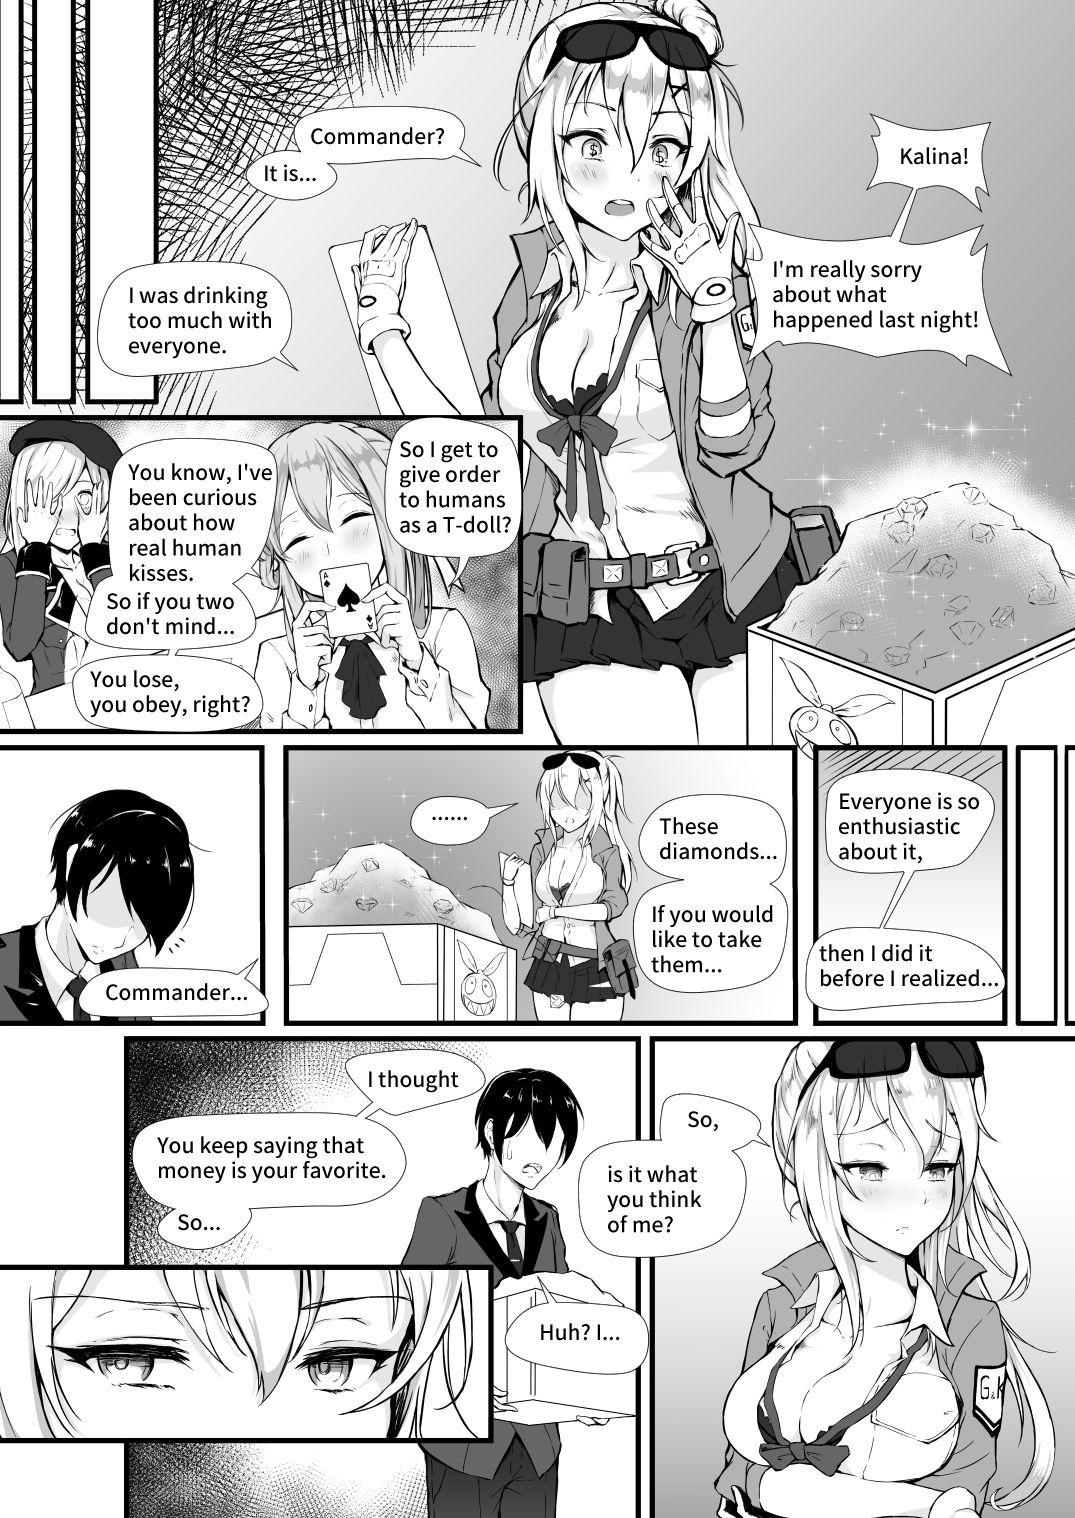 Free Hardcore How Many Diamonds a Kiss Worth? - Girls frontline Skirt - Page 5